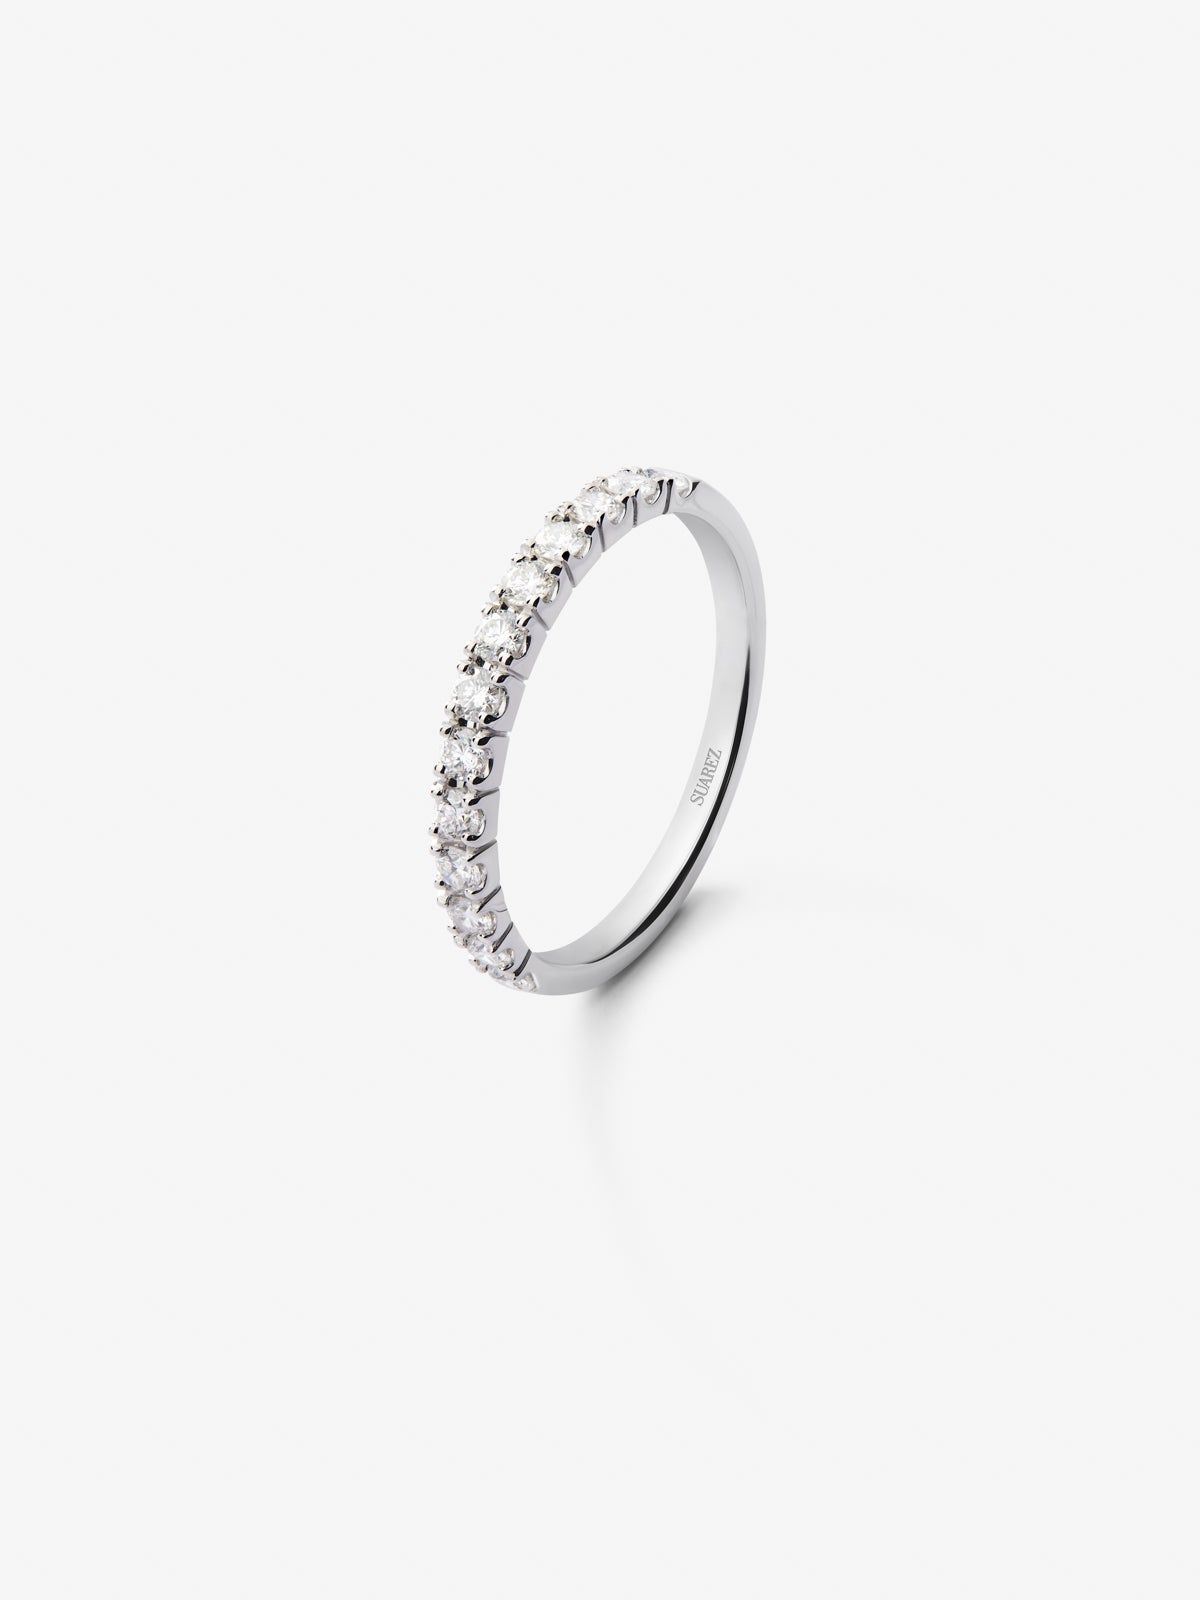 Half ring in 18K white gold with 13 brilliant-cut diamonds with a total of 0.37 cts